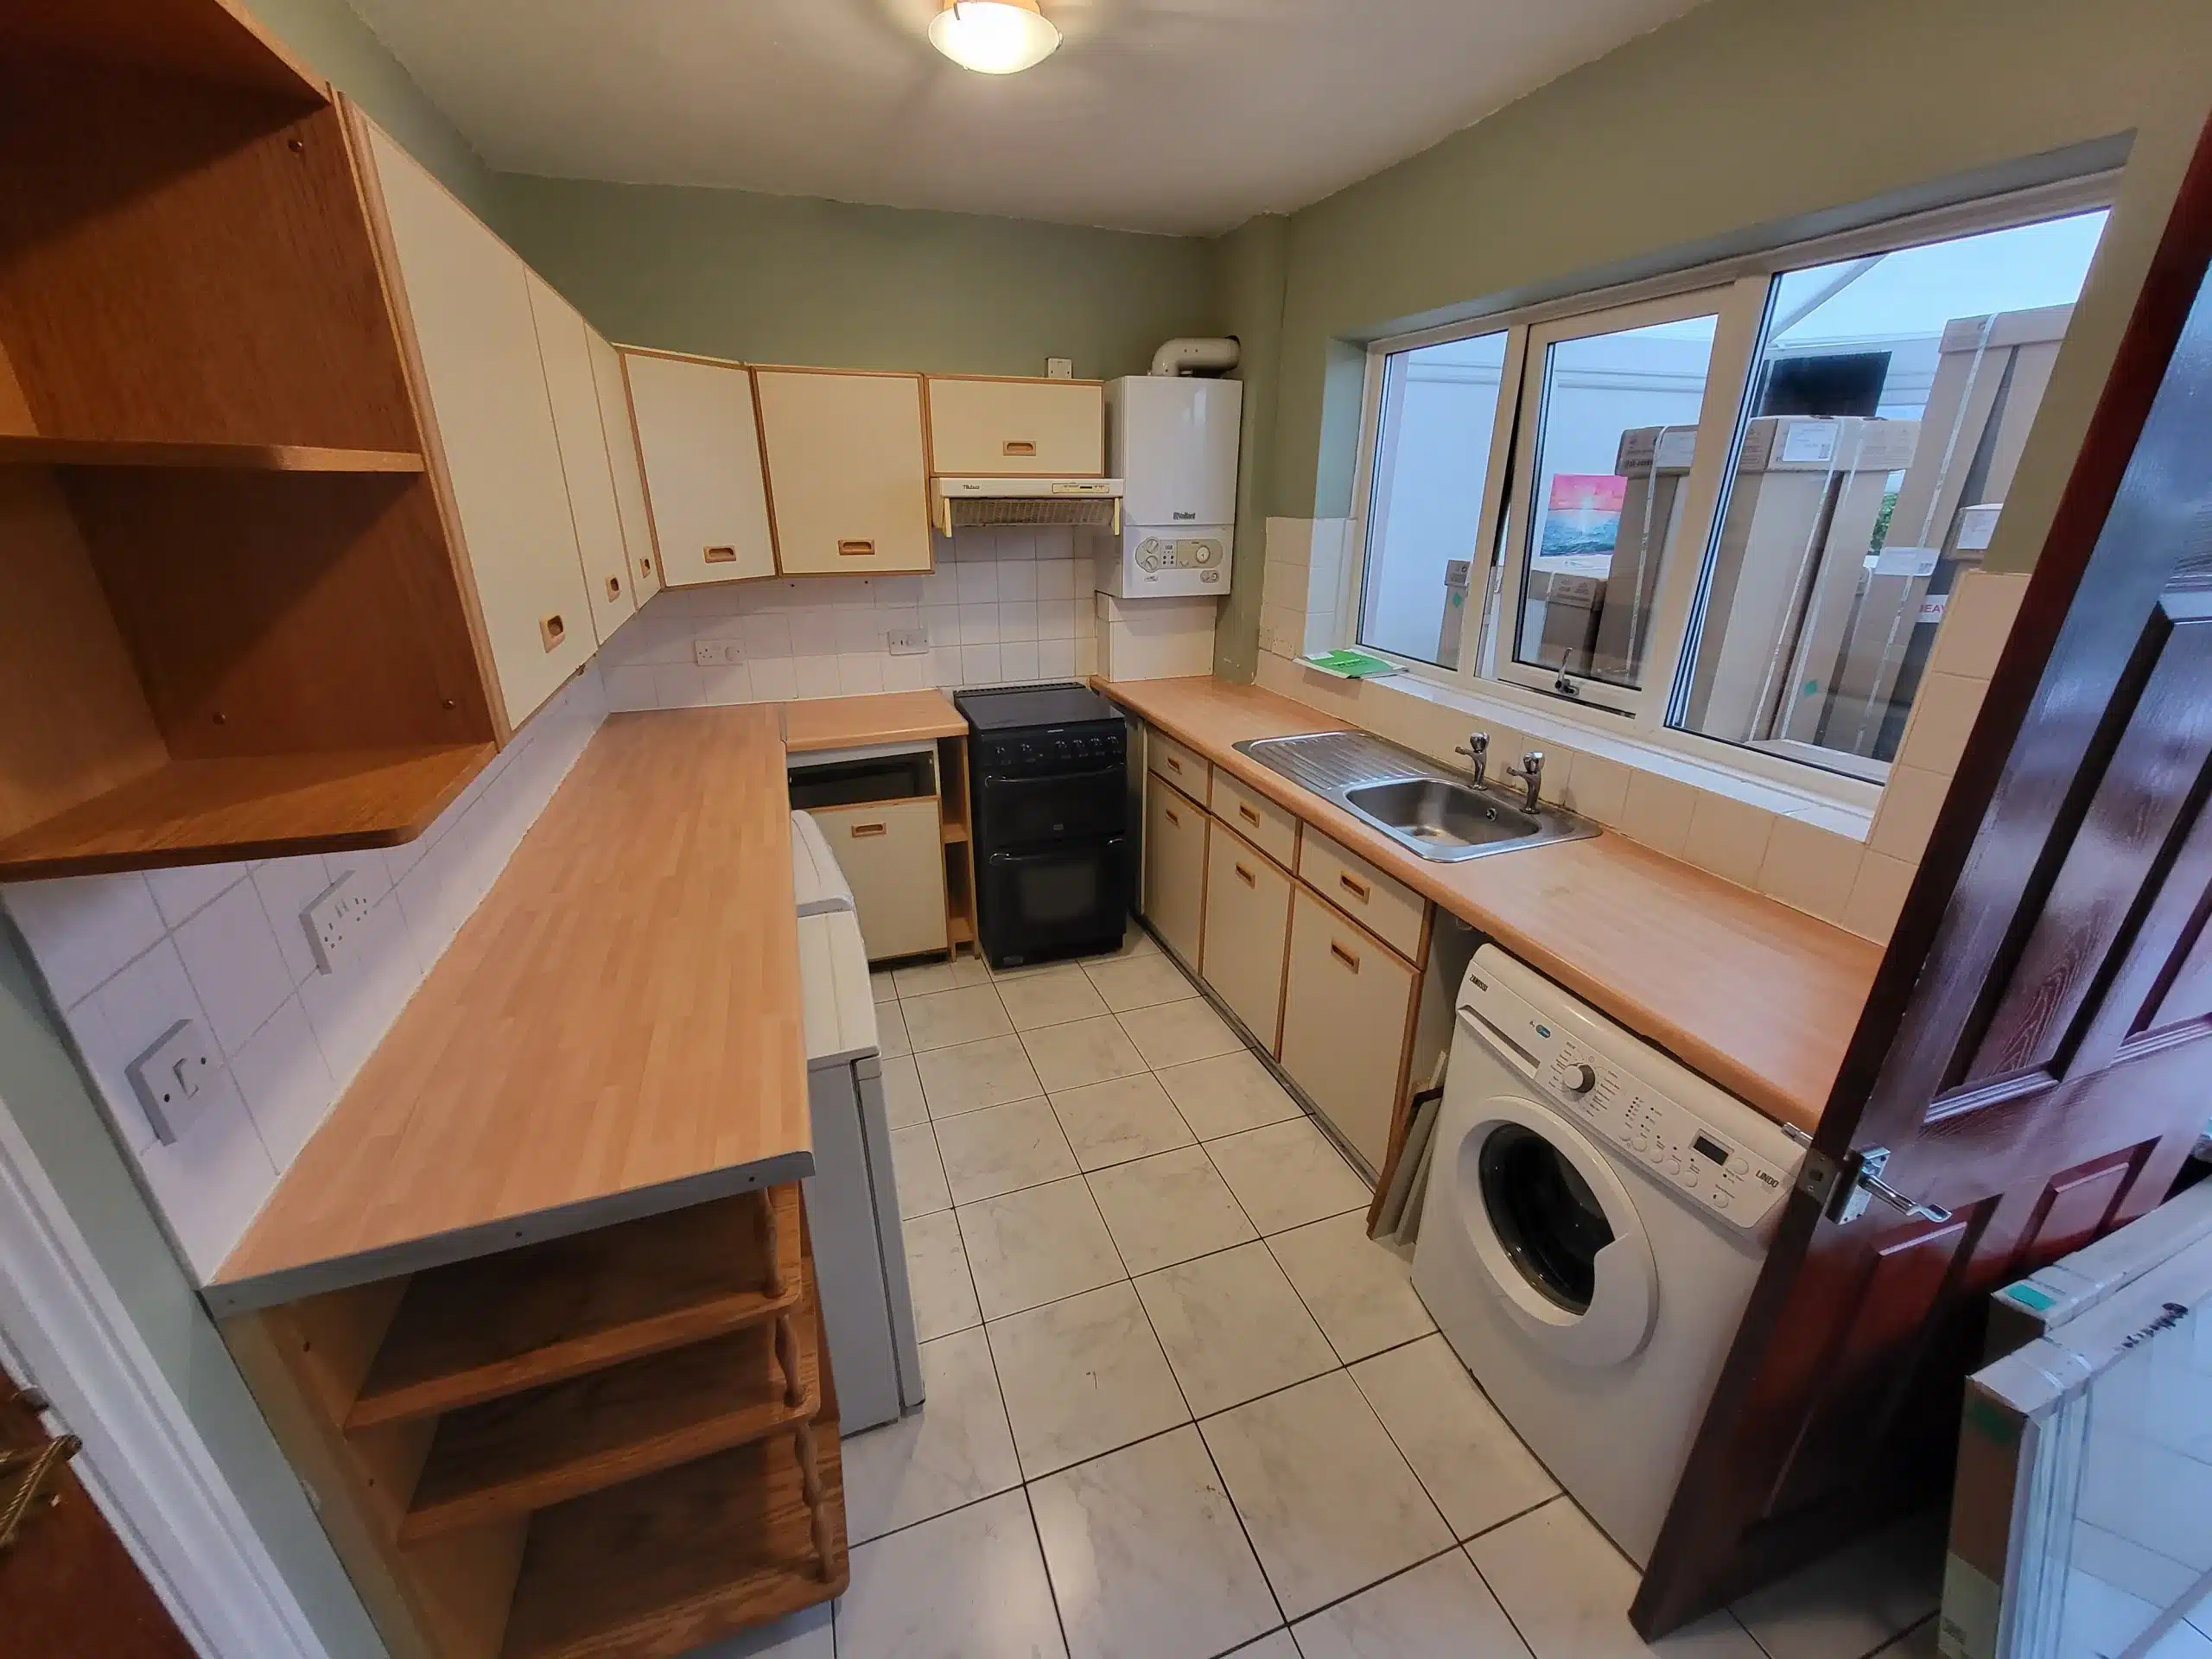 Kitchen fitting example showing wooden counters and appliances that were installed